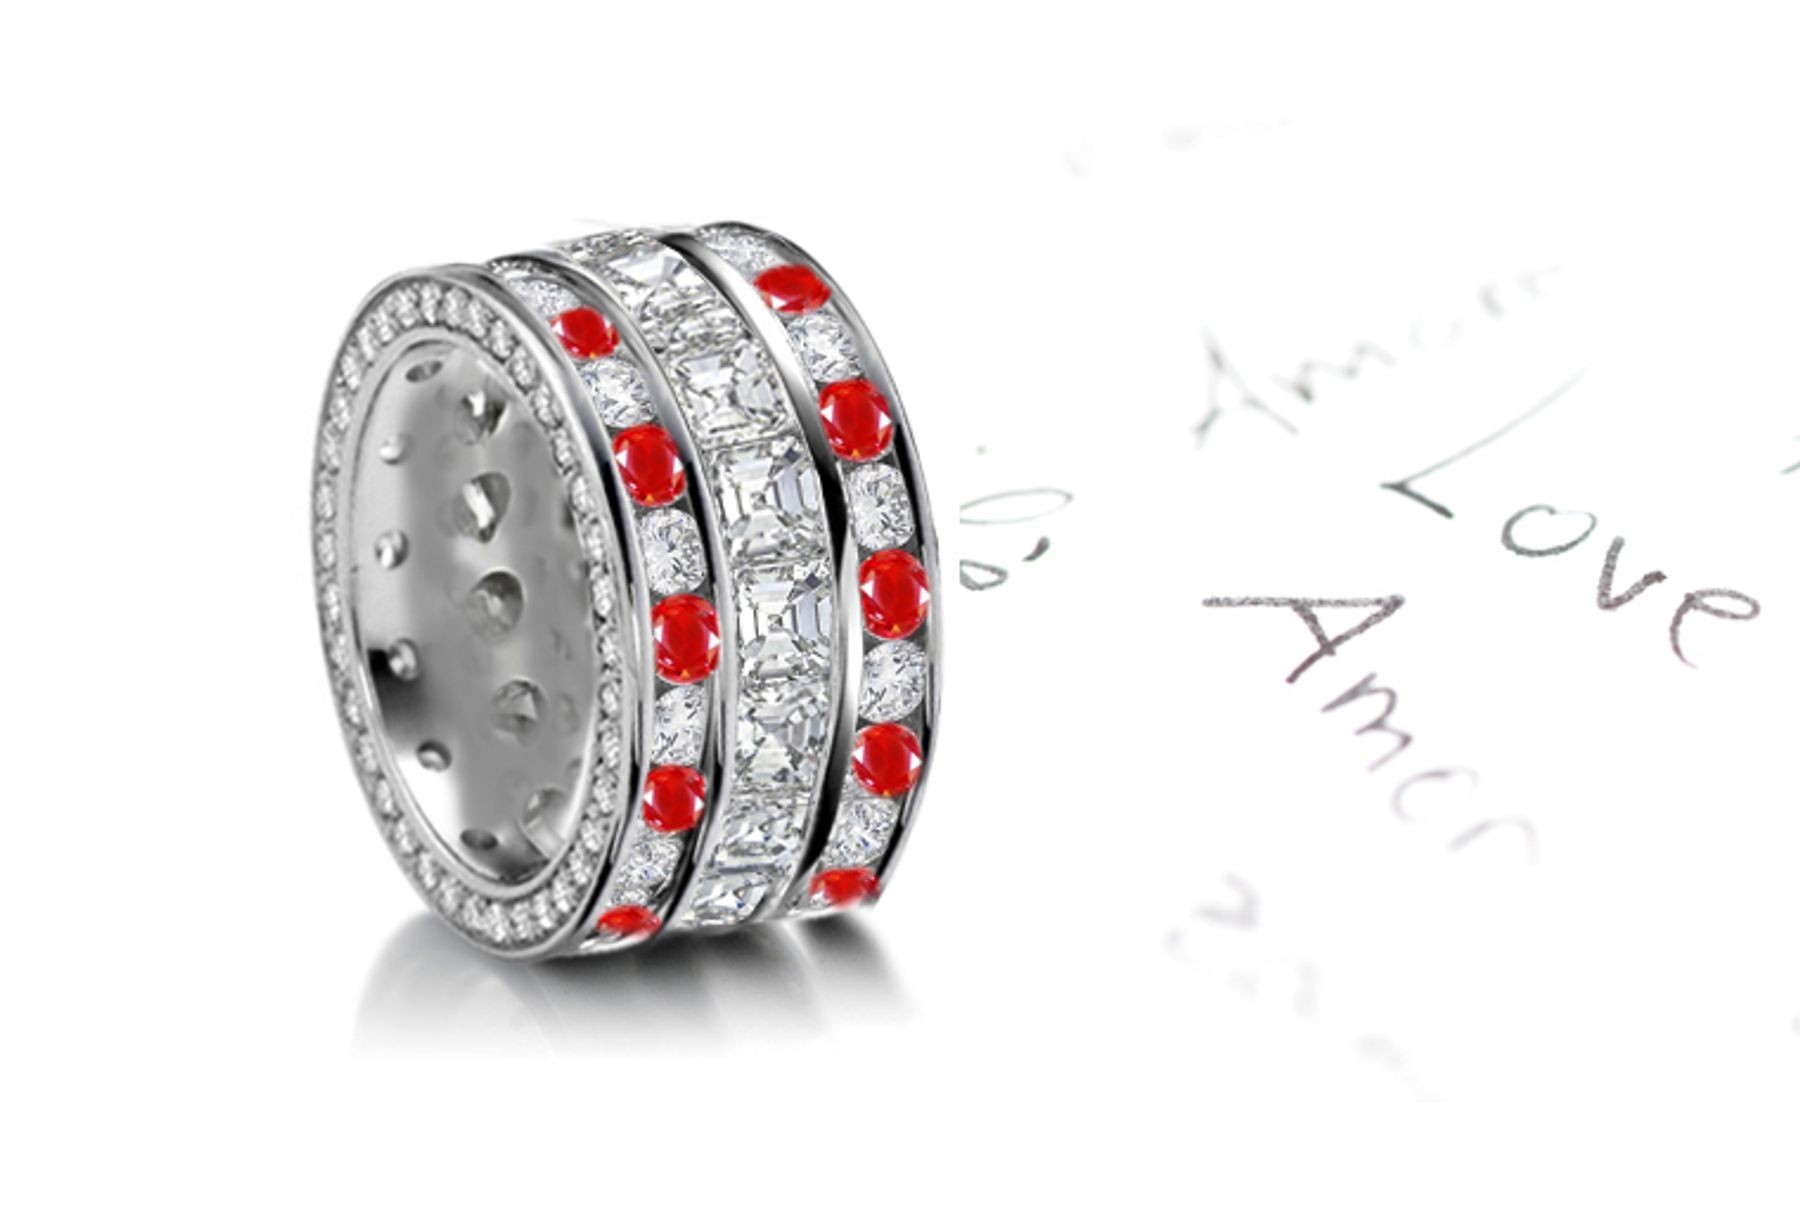 Craftsmanship: Three Sparkling Rows of Ruby & Diamond Eternity Bands in Platinum 950 Size 3 to 6